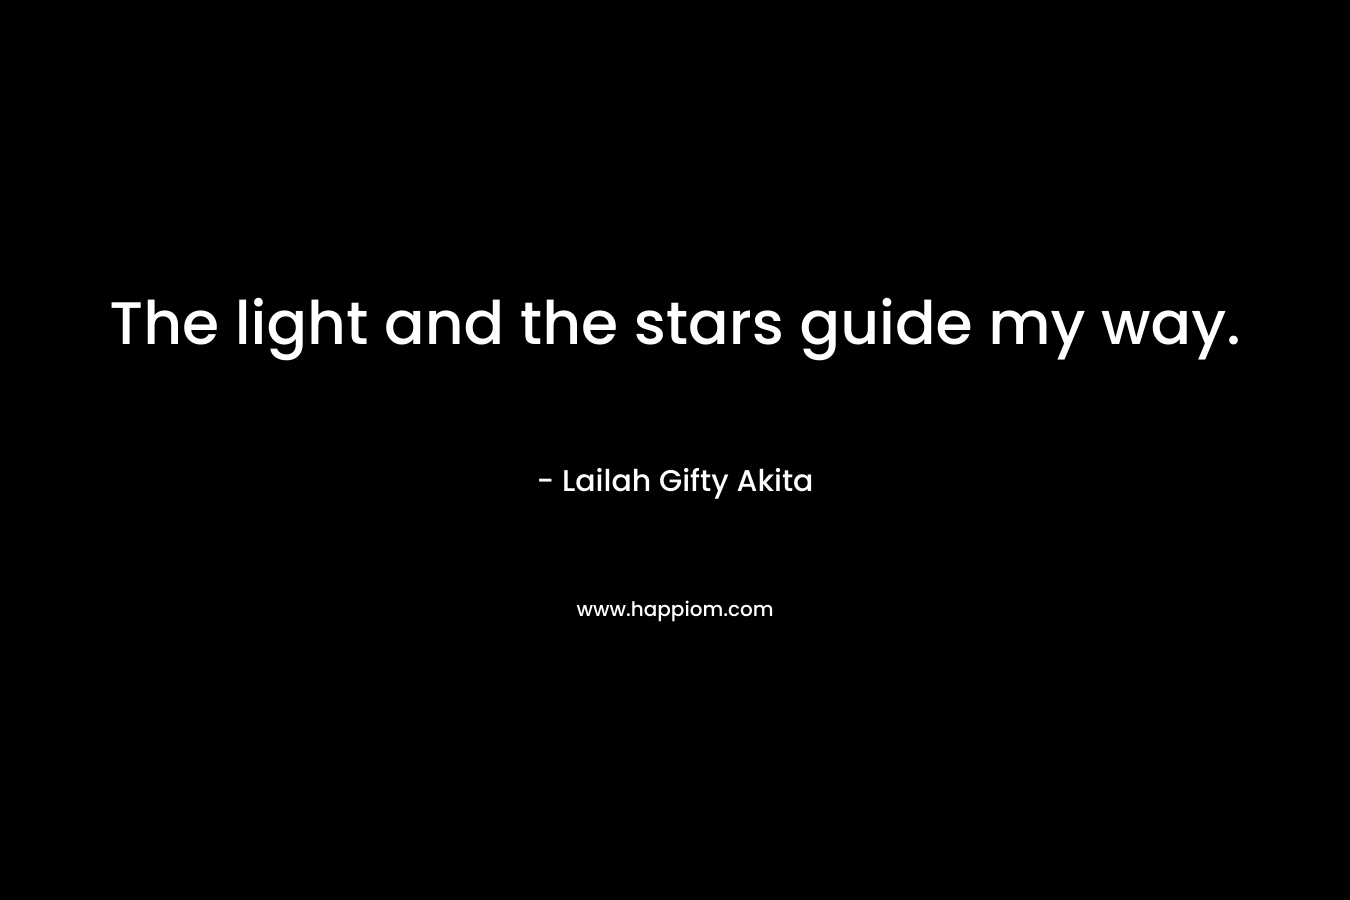 The light and the stars guide my way.